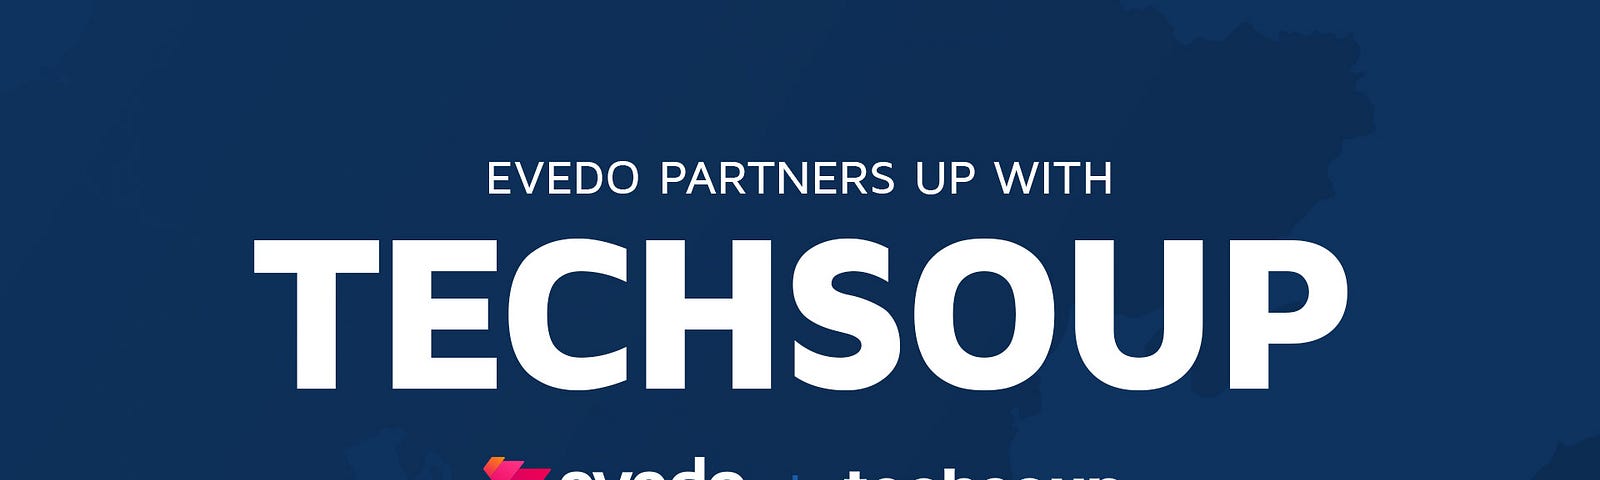 Evedo partners up with TechSoup